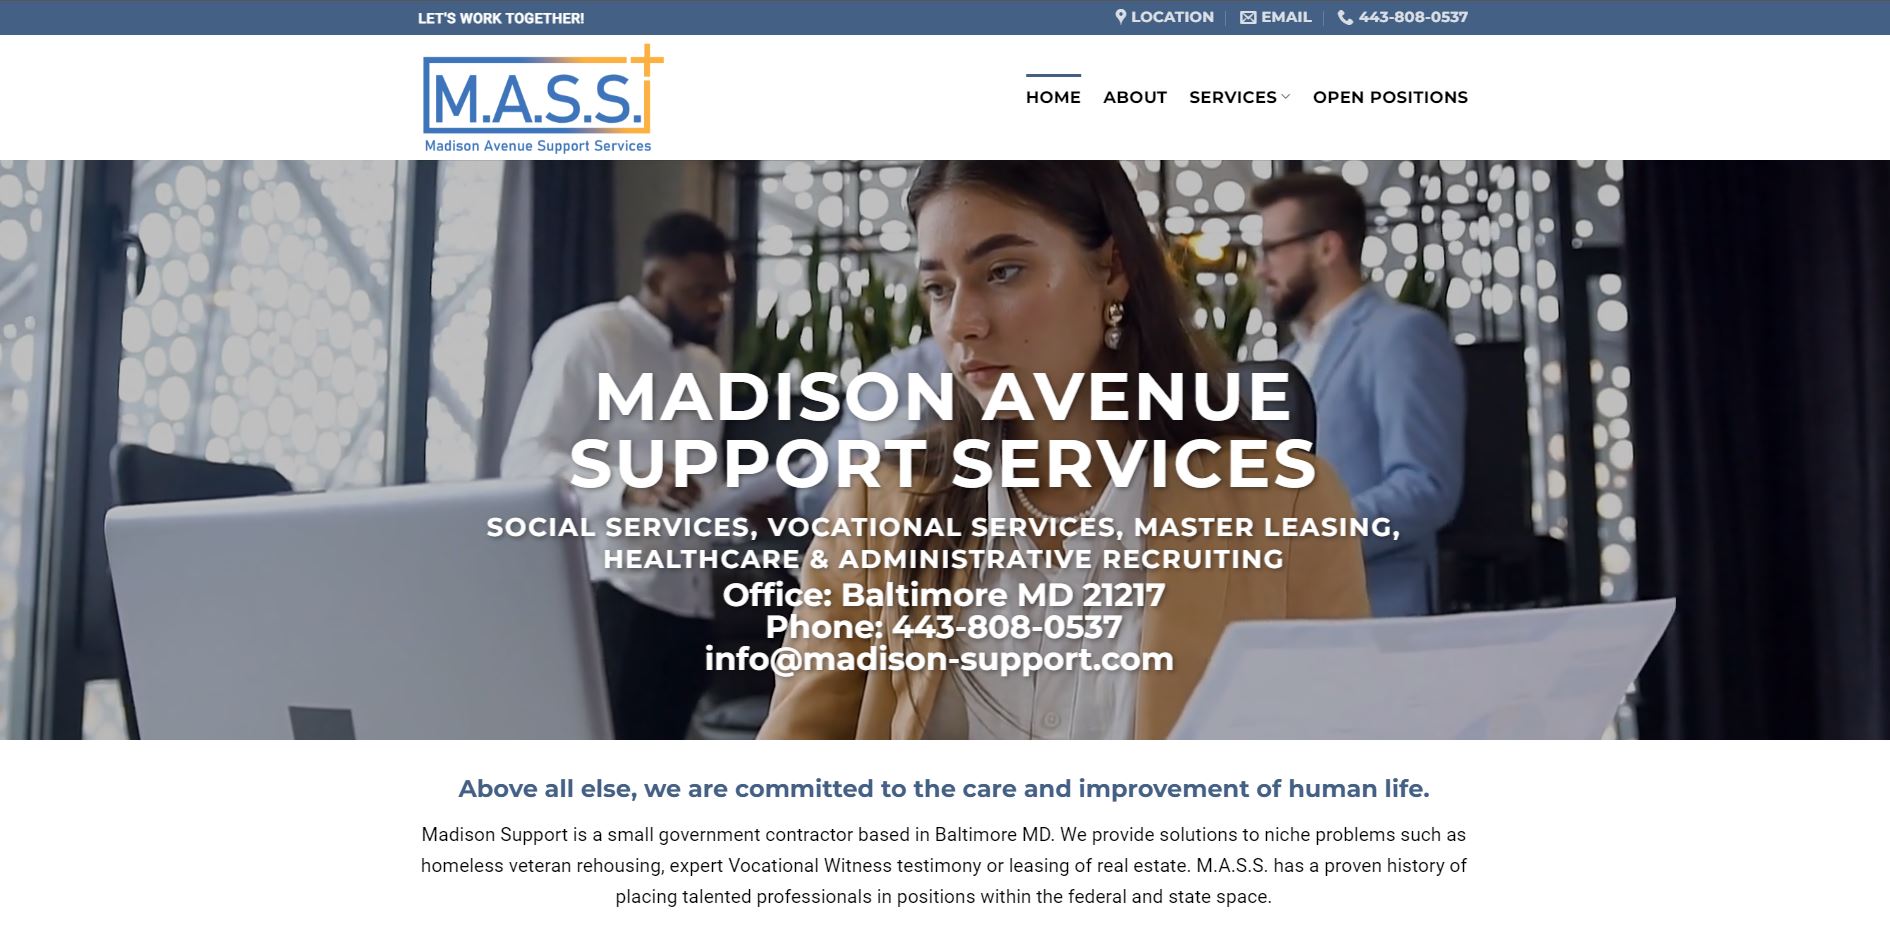 Madison Avenue Support Services